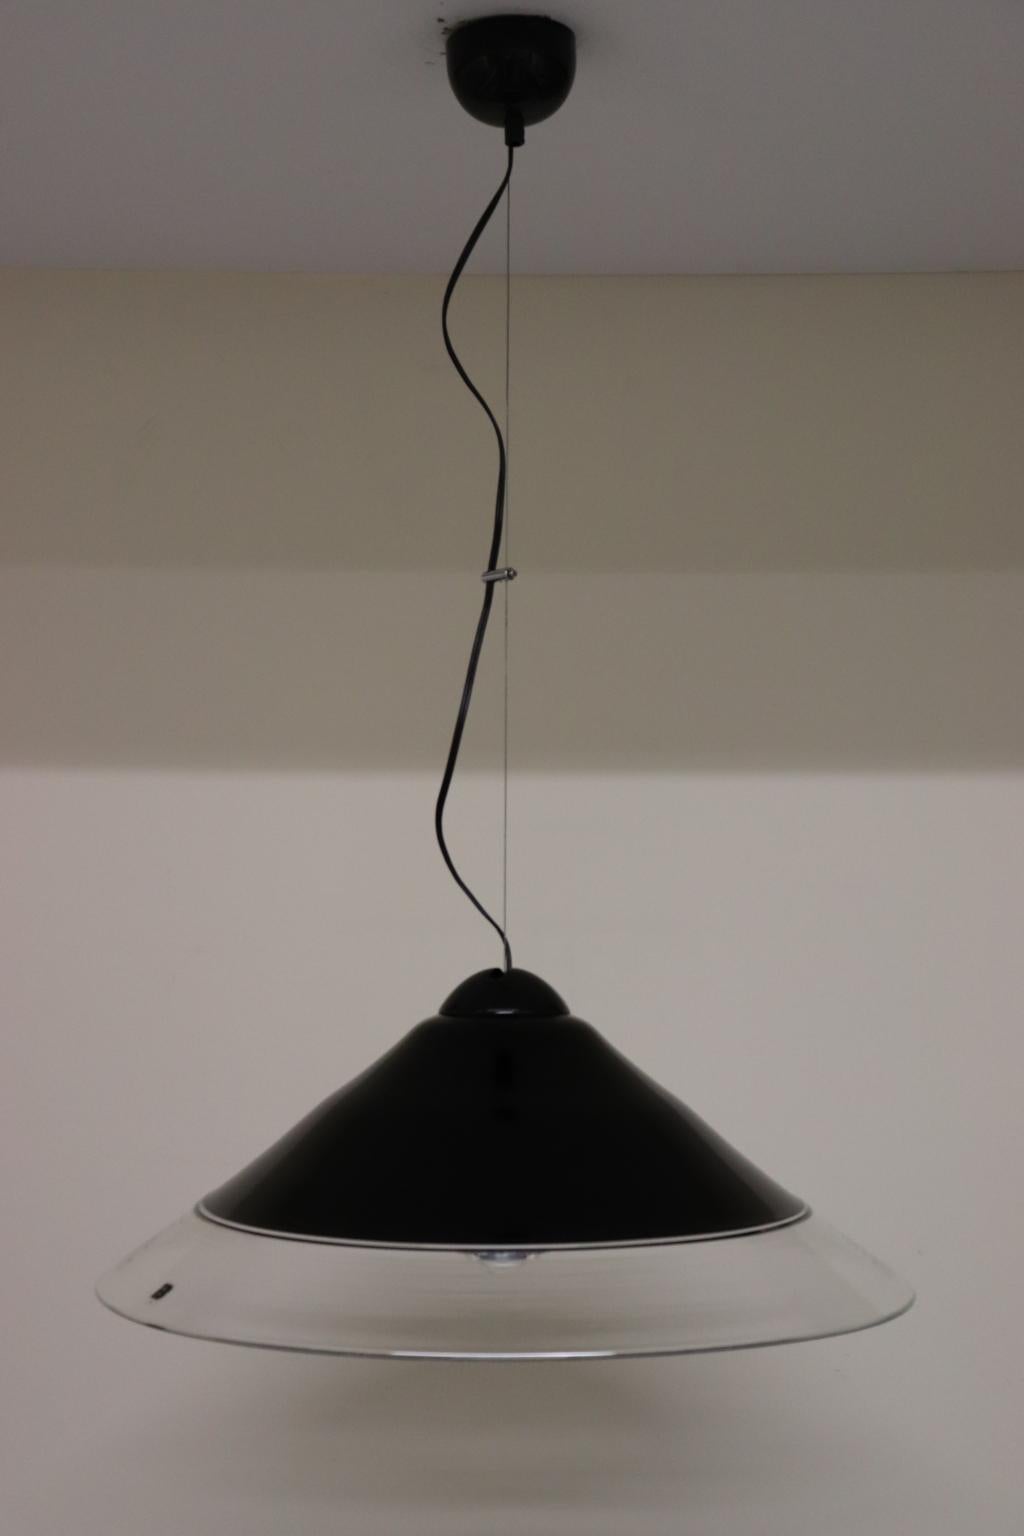 Vintage Italian Pendant Lamp Murano Black-Crystal Glass Diffuser In Excellent Condition For Sale In Saddle Brook , NJ